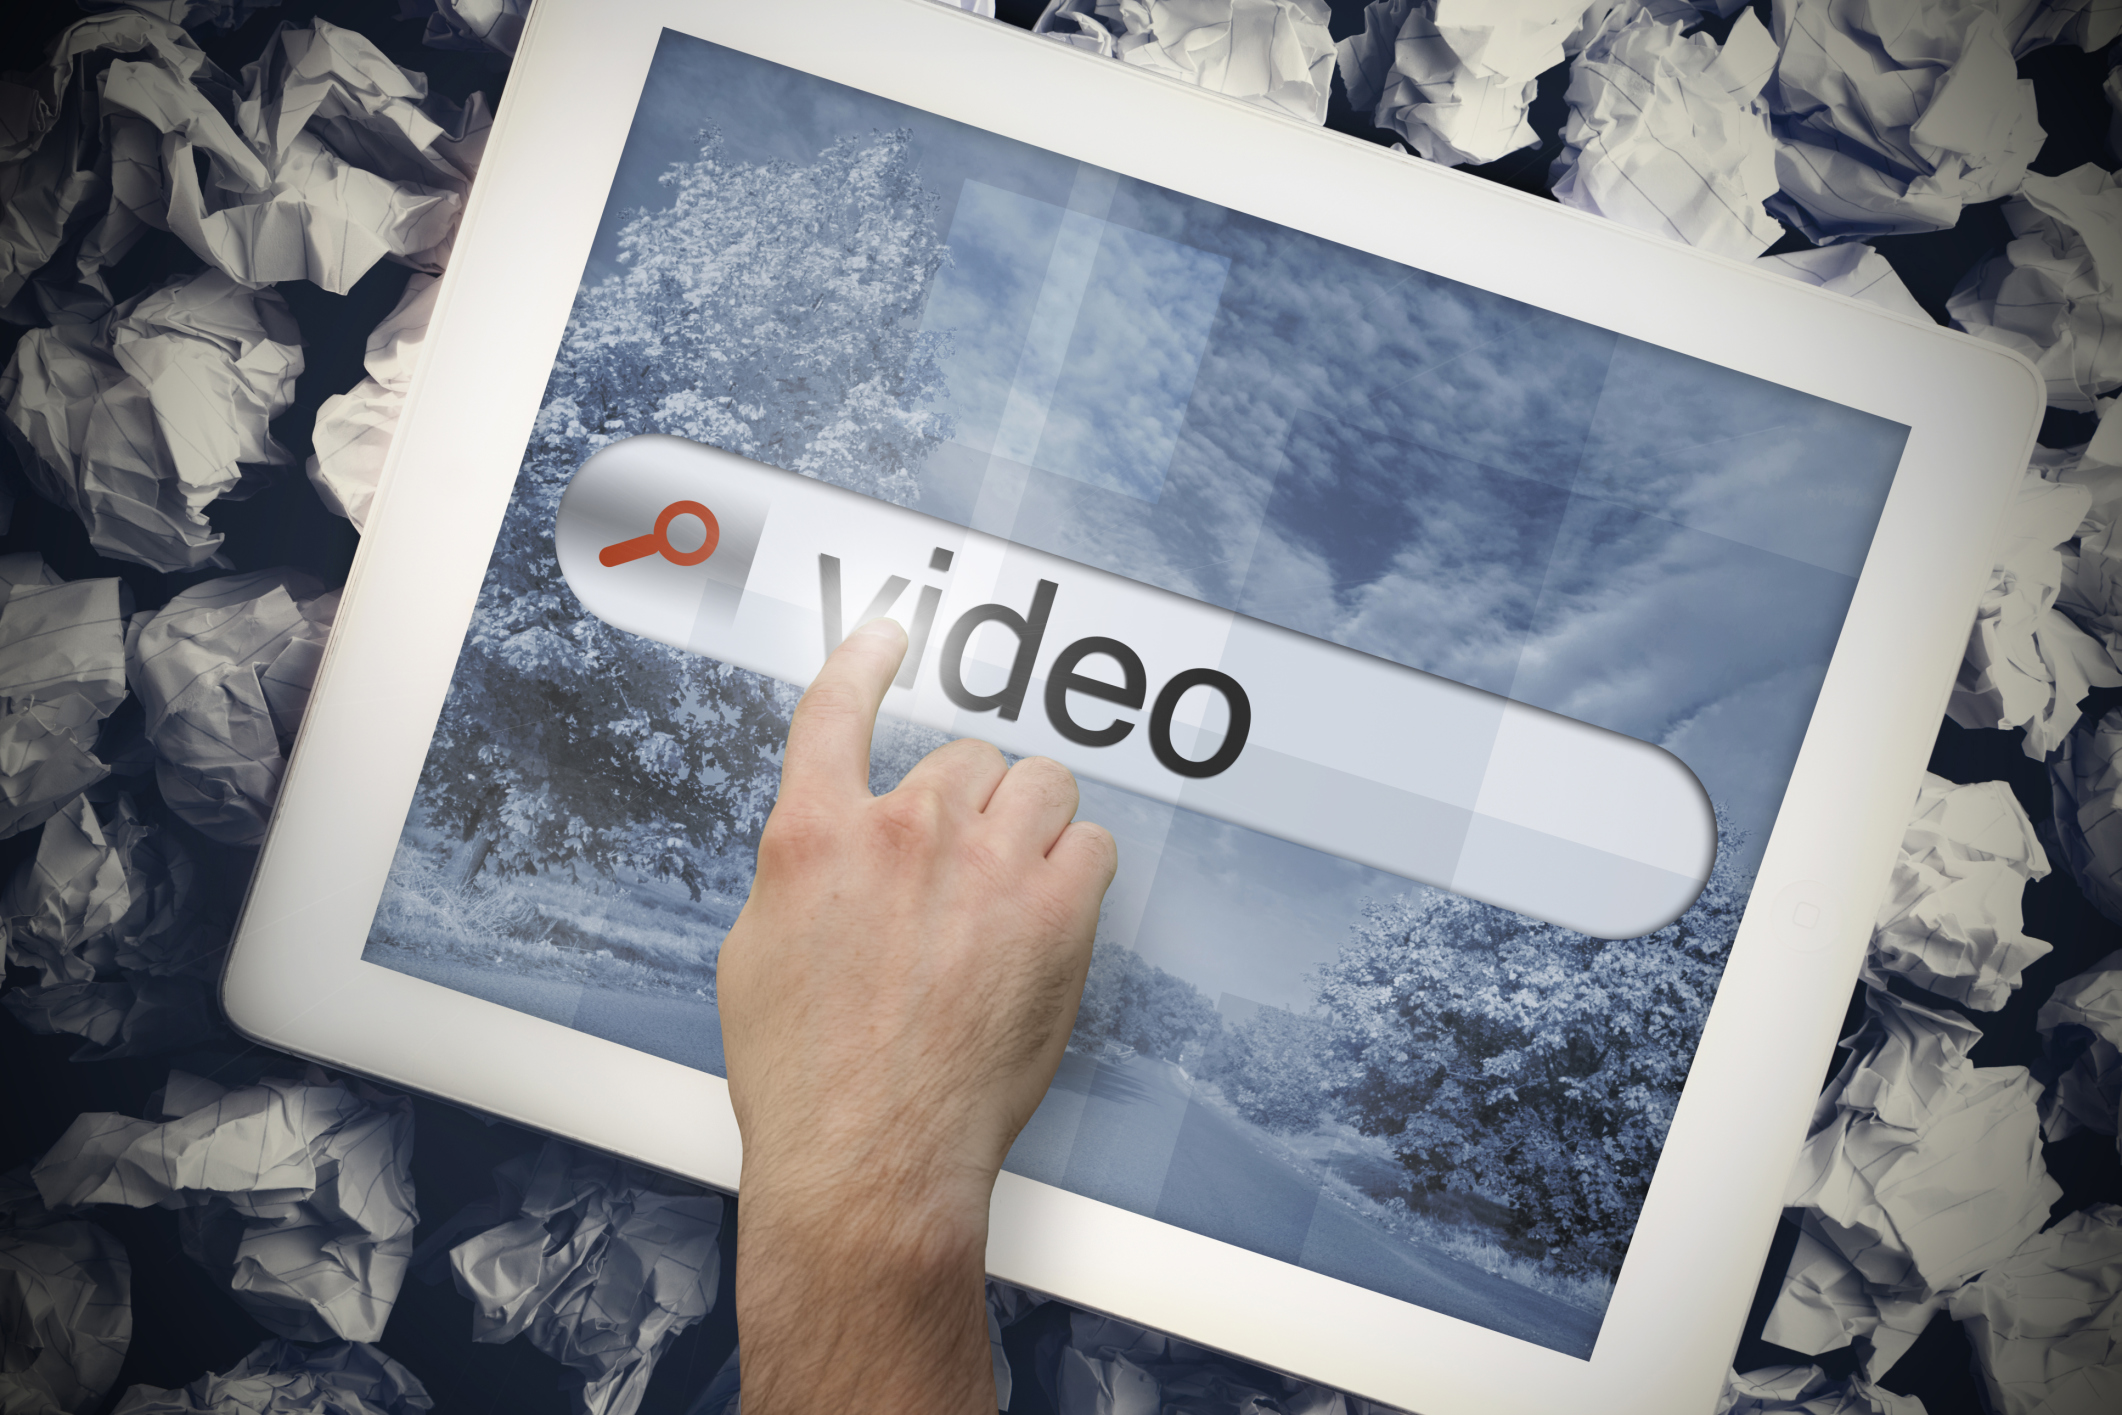 Online instruction using videos: Selecting instructional videos